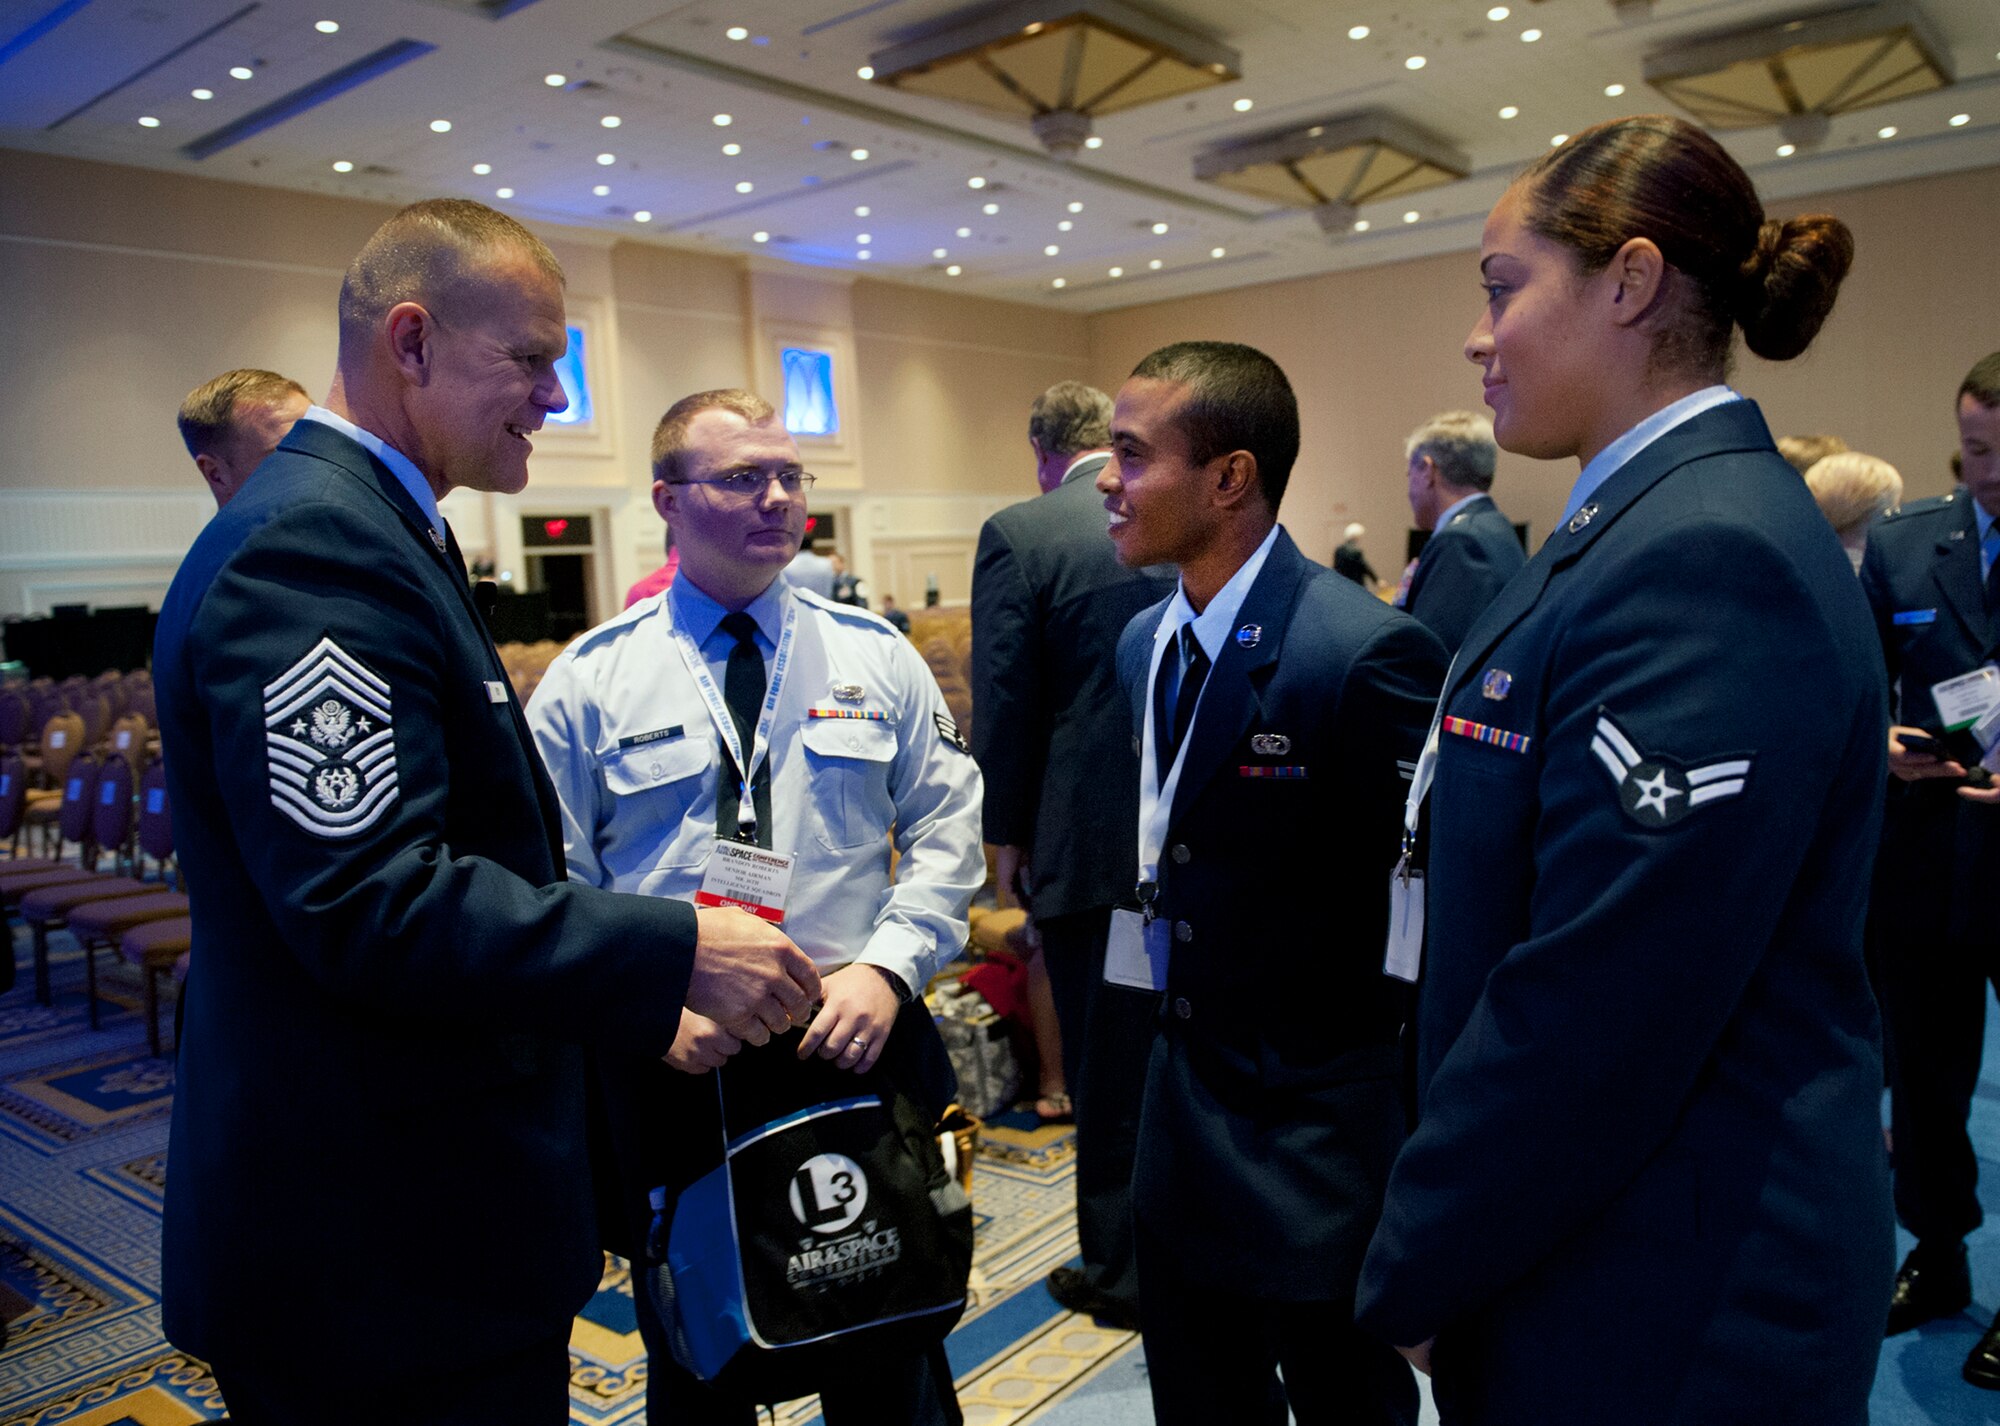 Chief Master Sgt. of the Air Force James A. Roy, left, speaks to Airmen during the enlisted call of the Air Force Association's Air and Space Conference and Technology Exposition in Washington, Sept. 19, 2012. (U.S. Air Force photo/Val Gempis)